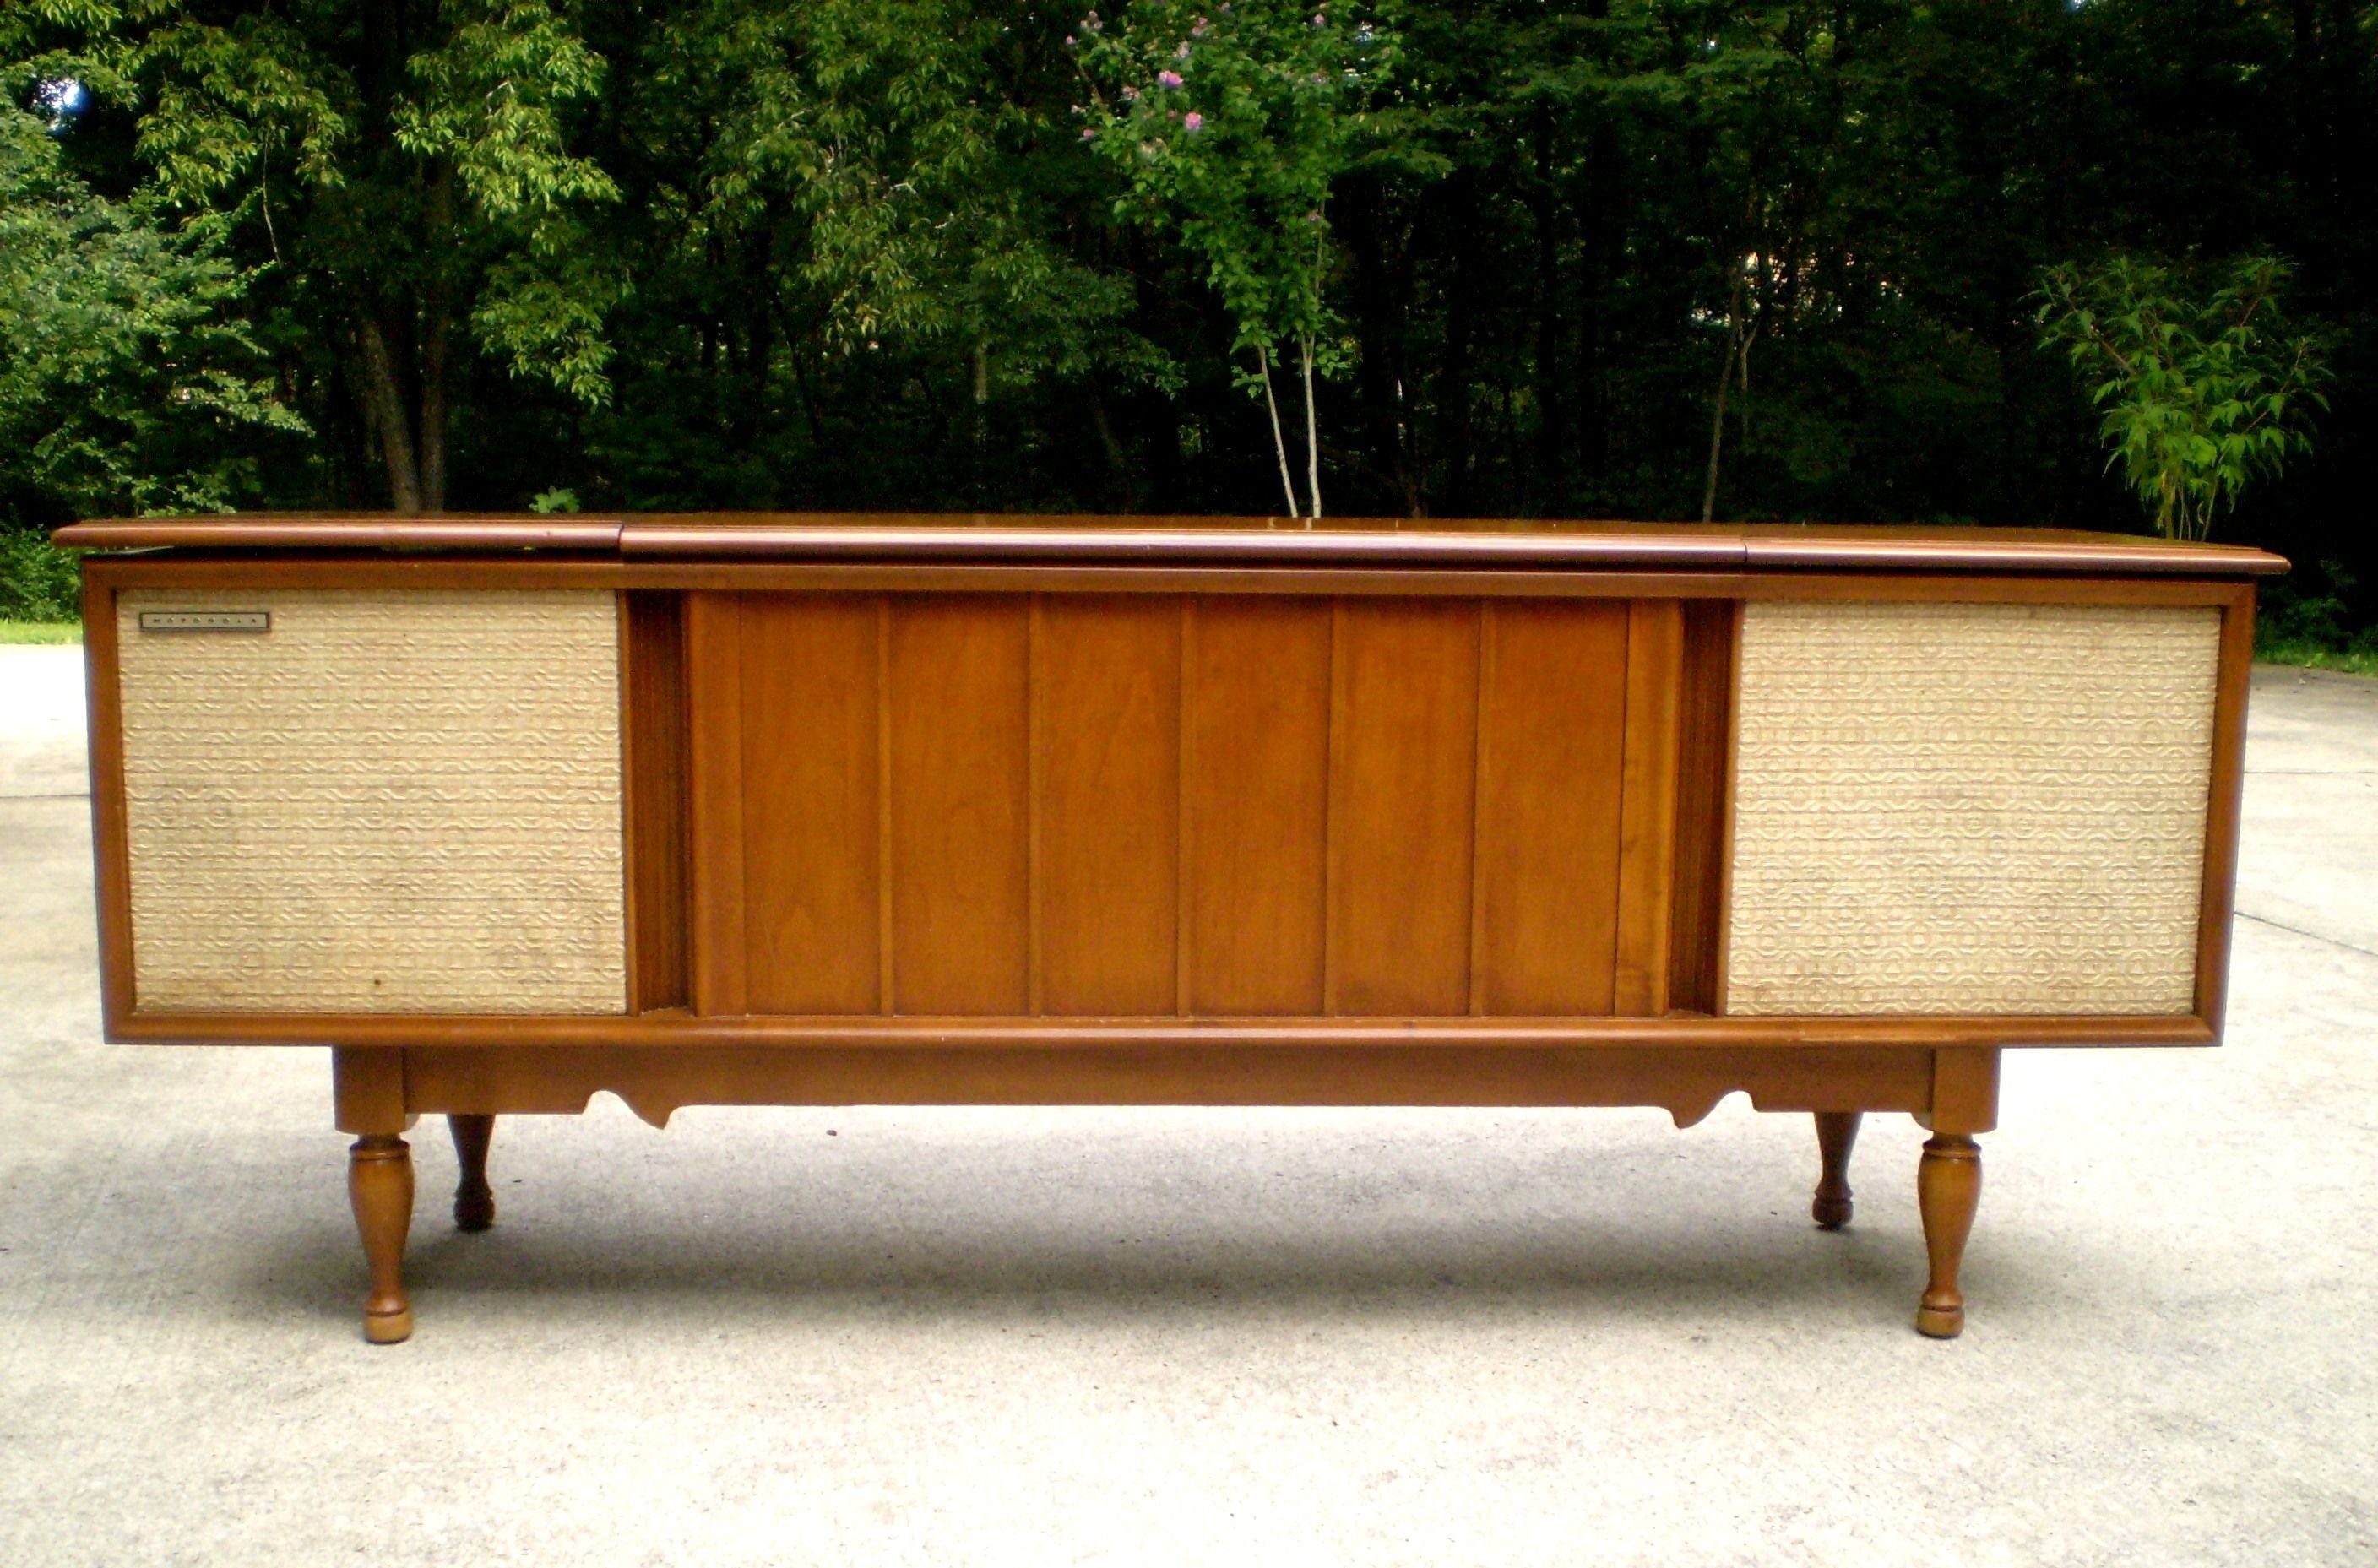 1959 Motorola Stereo Console Cabinet For Sale In Nashville Intended For Retro Holistic Credenzas (View 11 of 30)